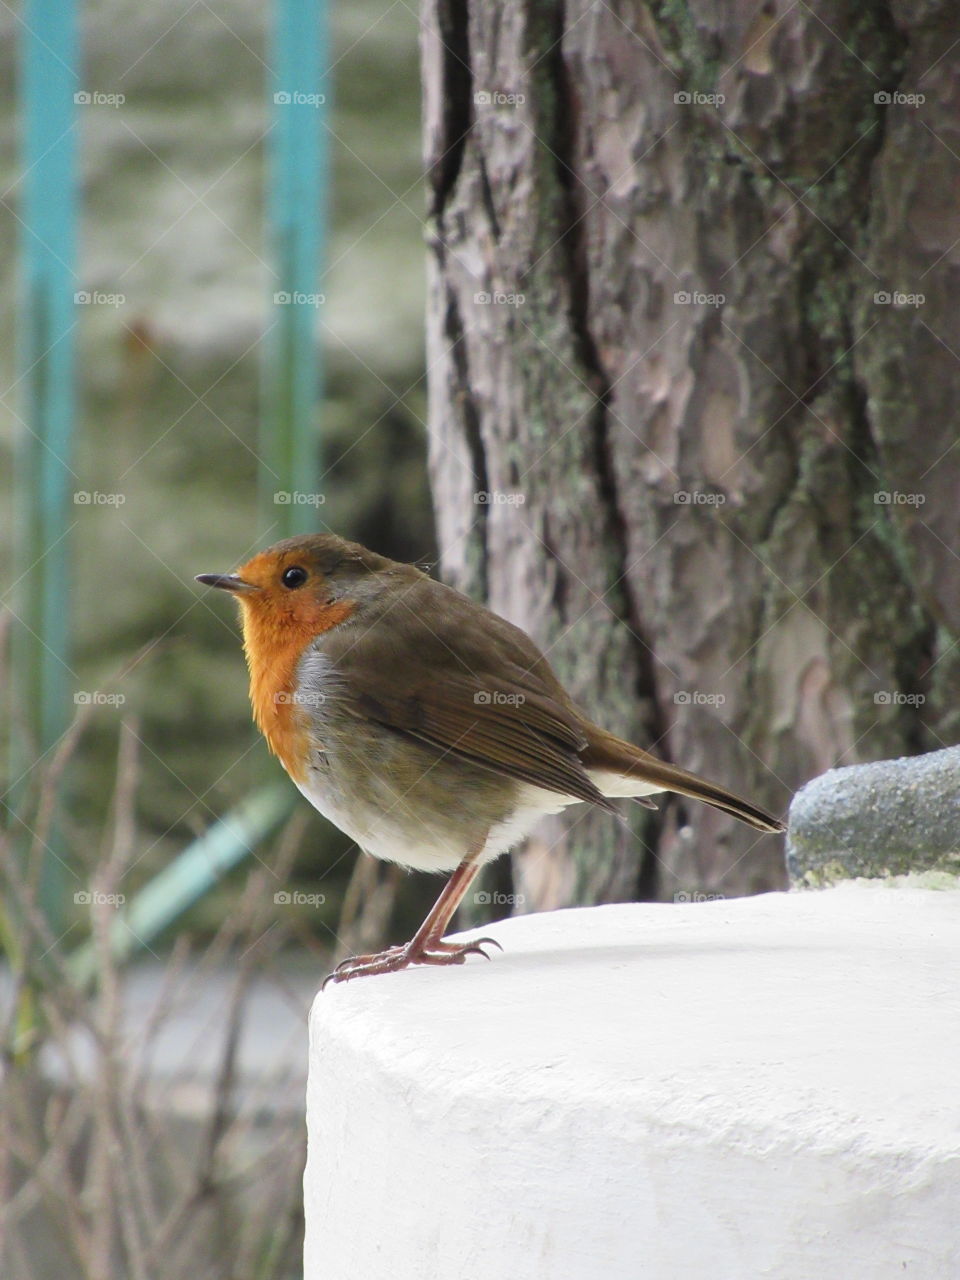 A very round robin stood on white step next to tree trunk and bright railings in background